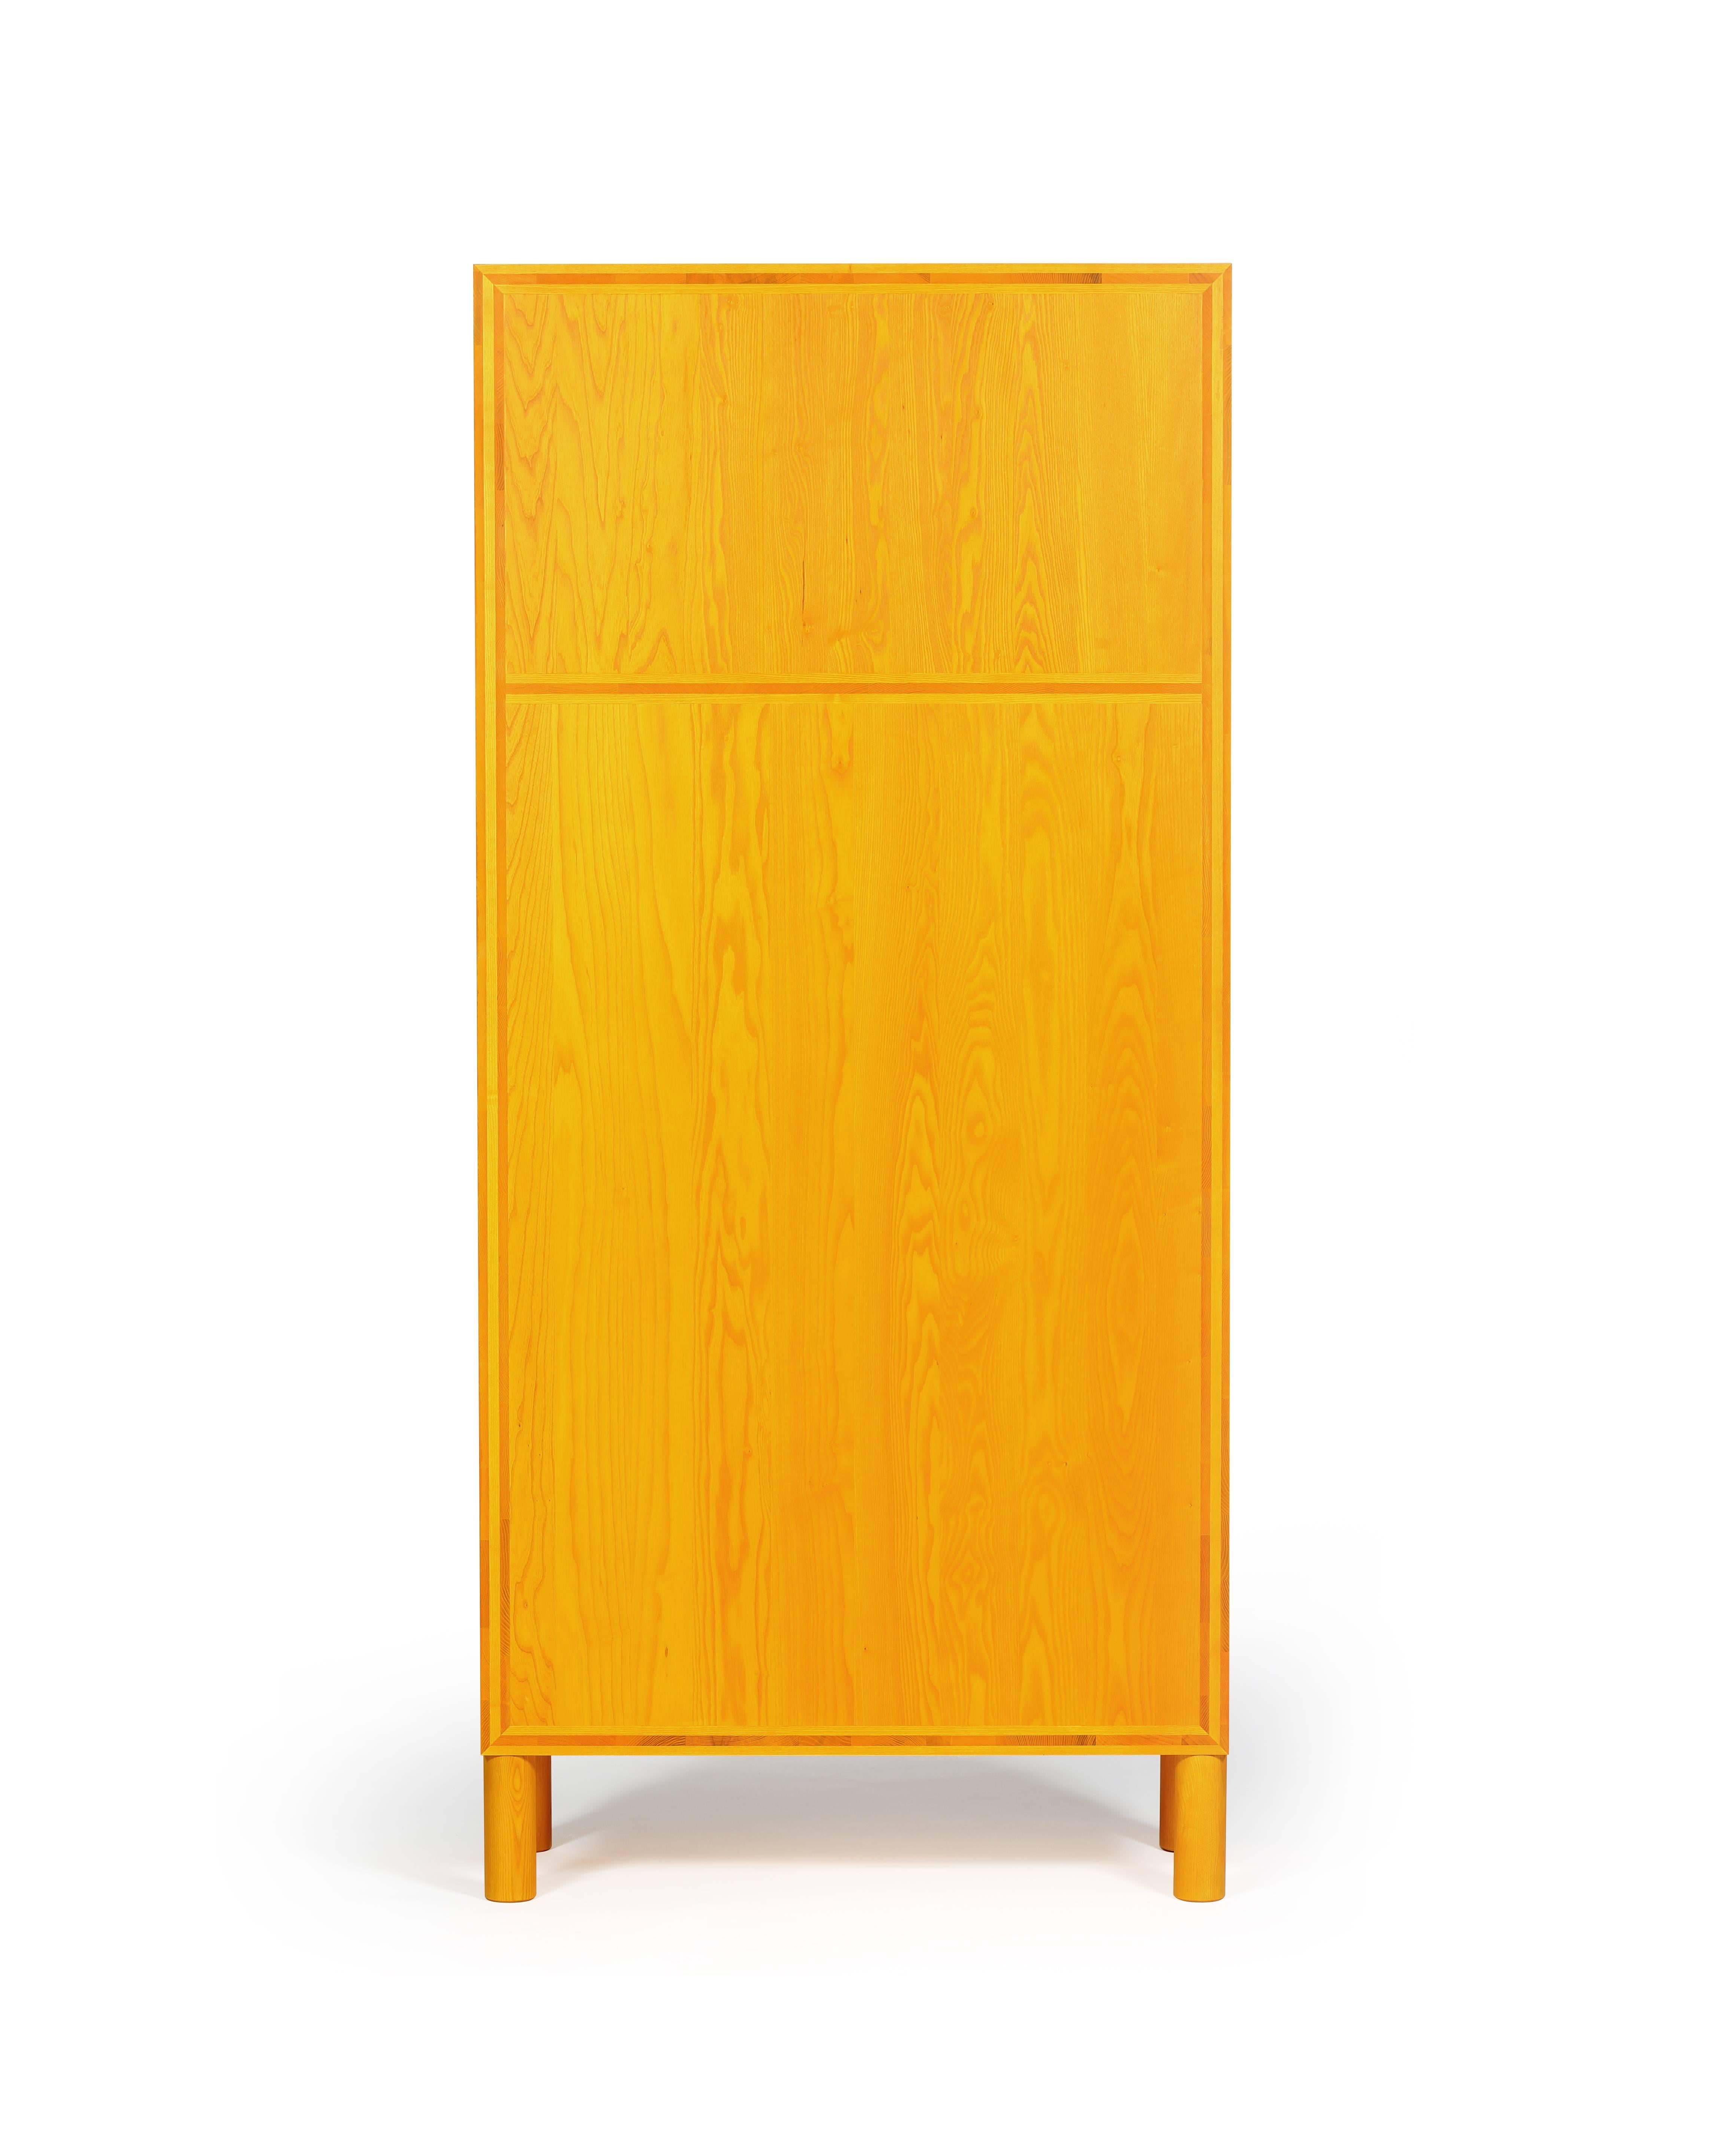 French Studiolo Cabinets by Pierre Gonalons